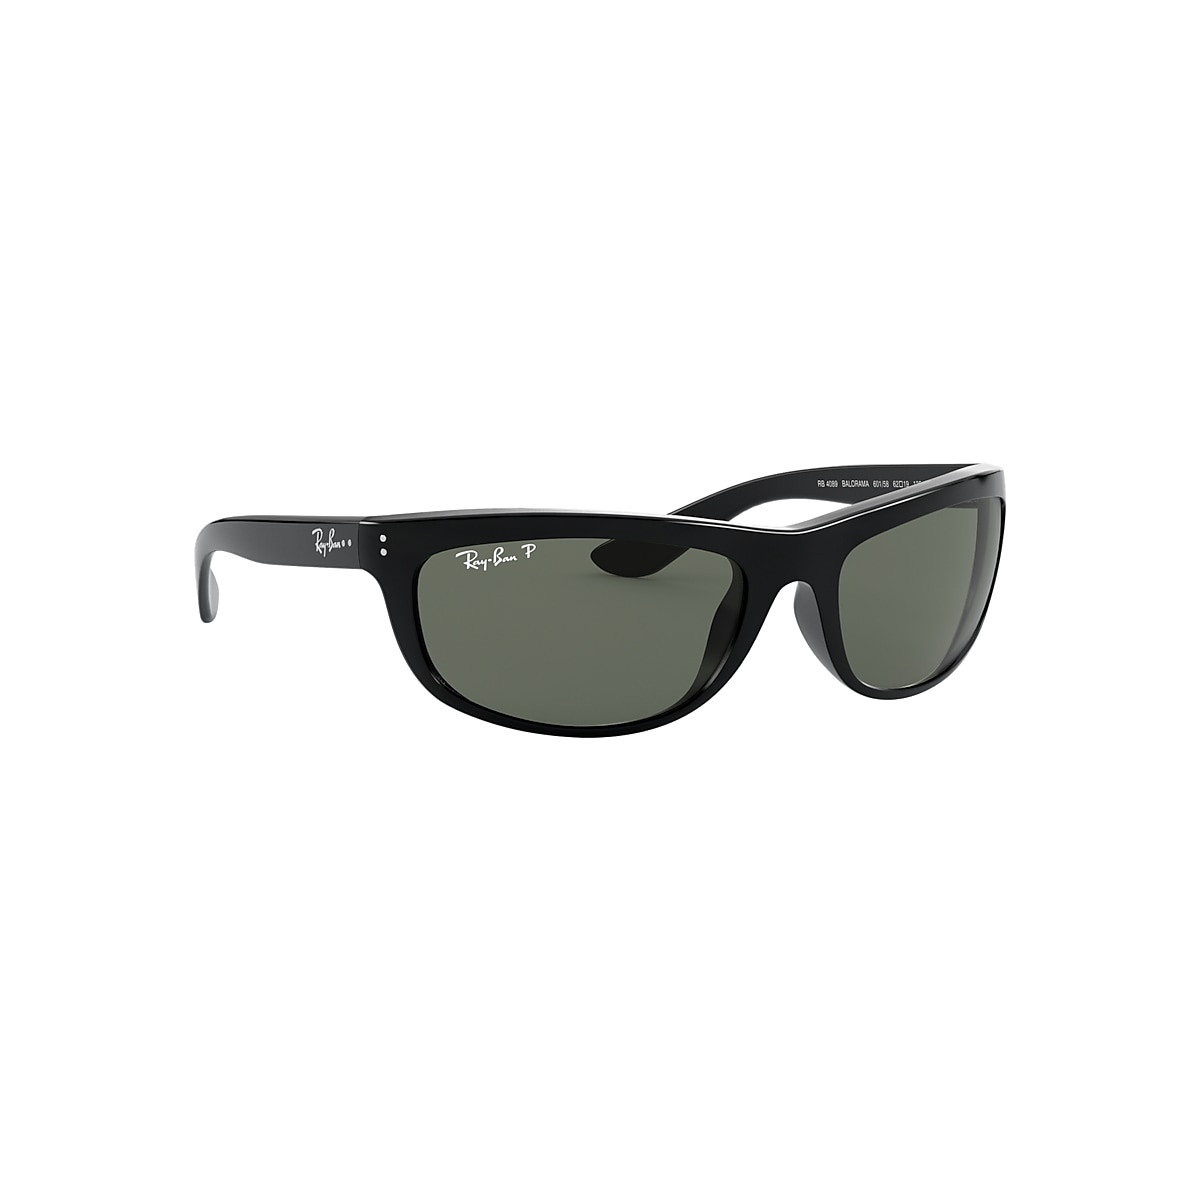 BALORAMA Sunglasses in Black and Green - RB4089 | Ray-Ban® US